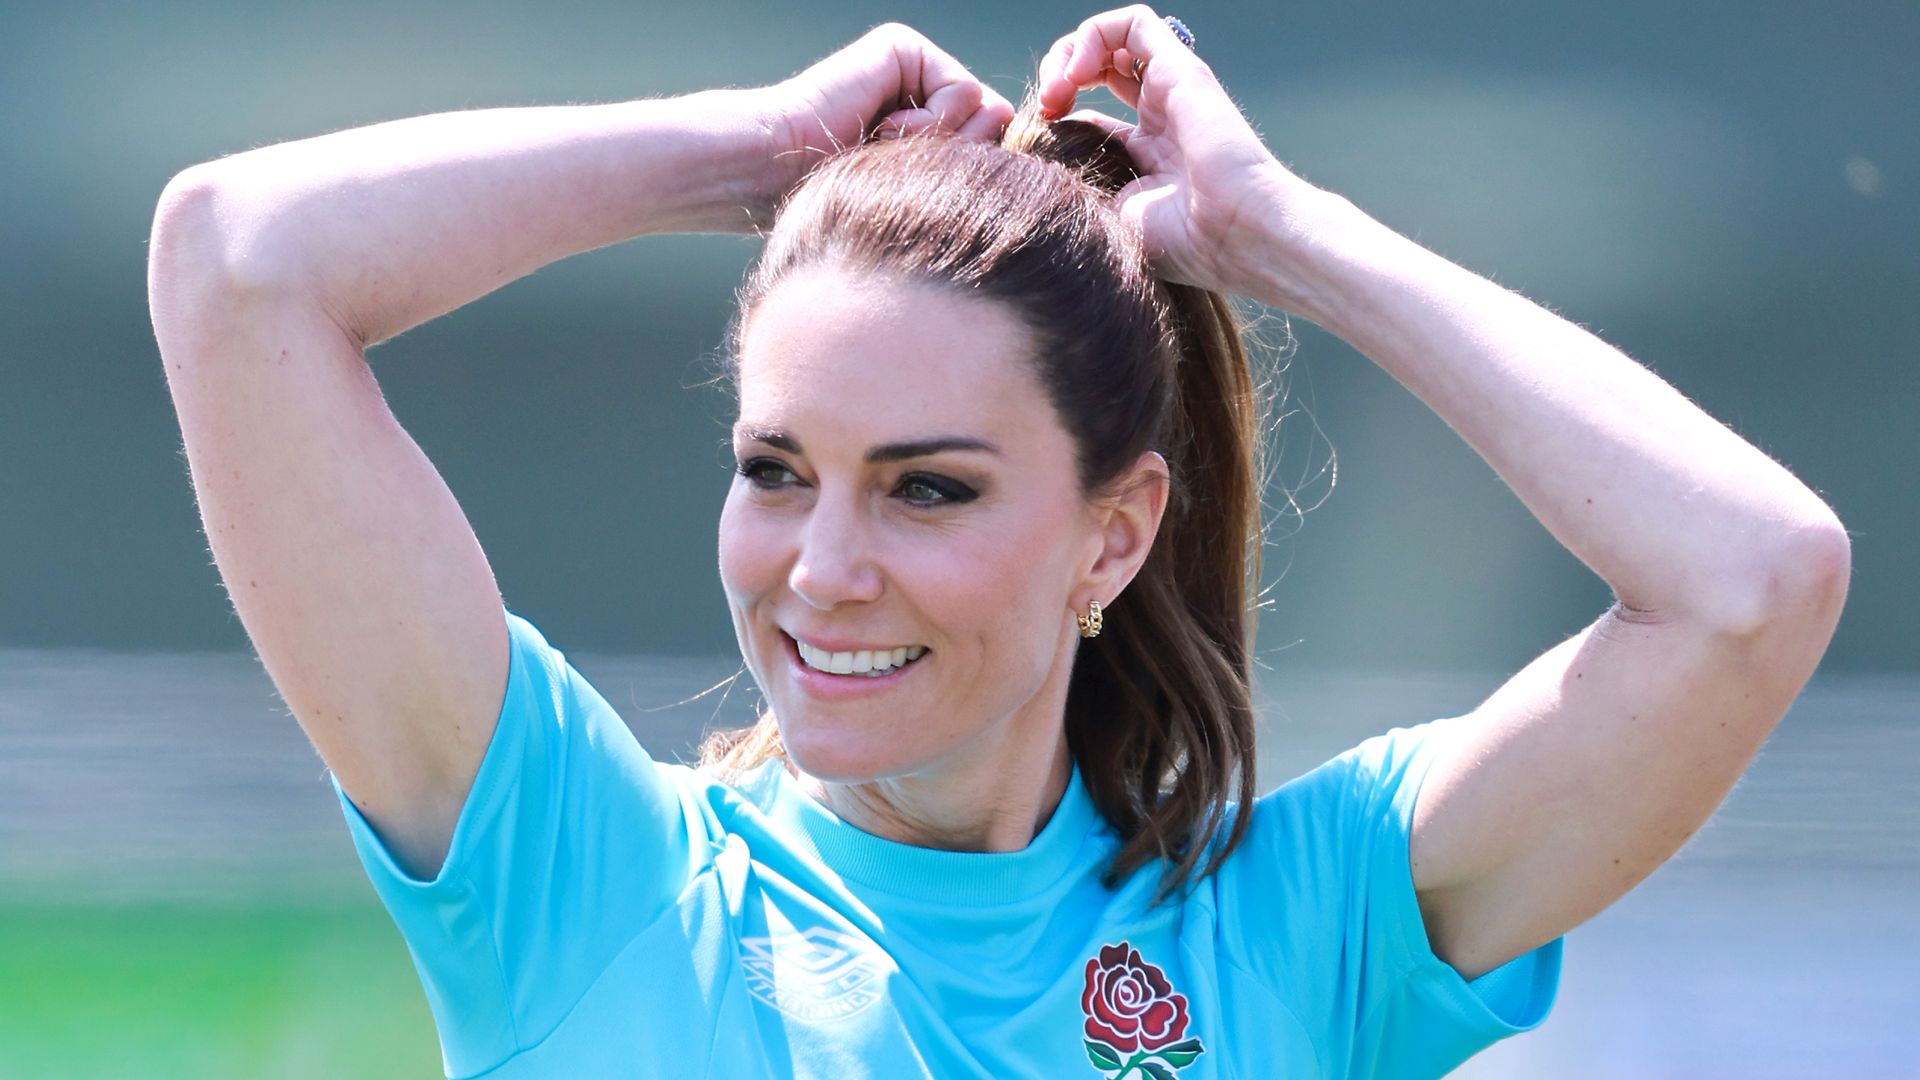 Kate Middleton with her hair in a sporty high ponytail